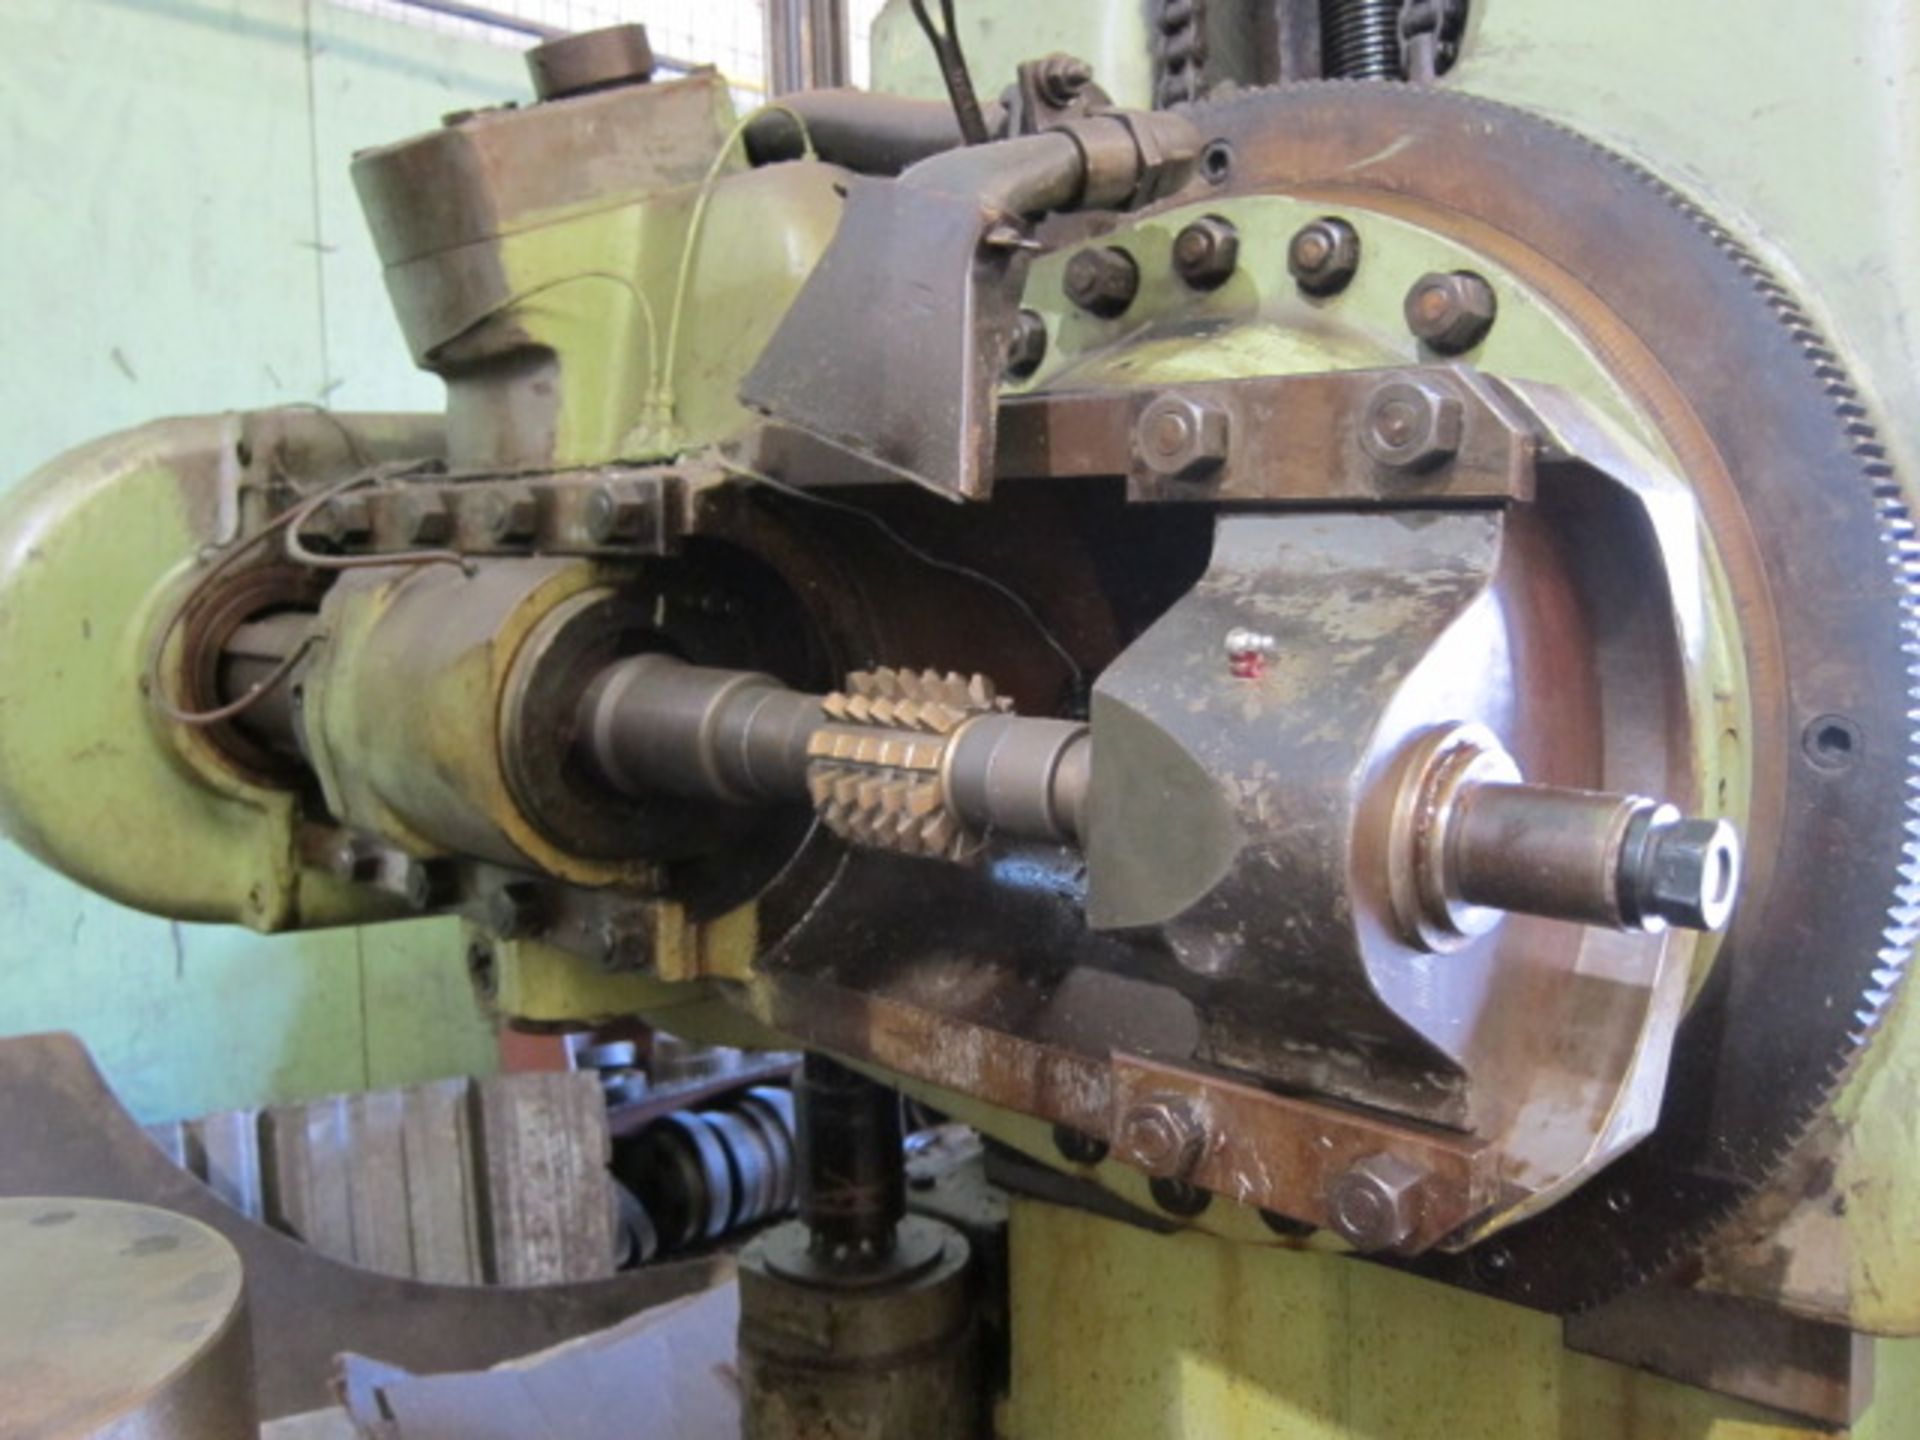 GEAR HOBBER, GOULD & EBERHARDT 72” MDL. 72H, 18” face width, 36” table dia., tailstock, coolant - Image 2 of 6